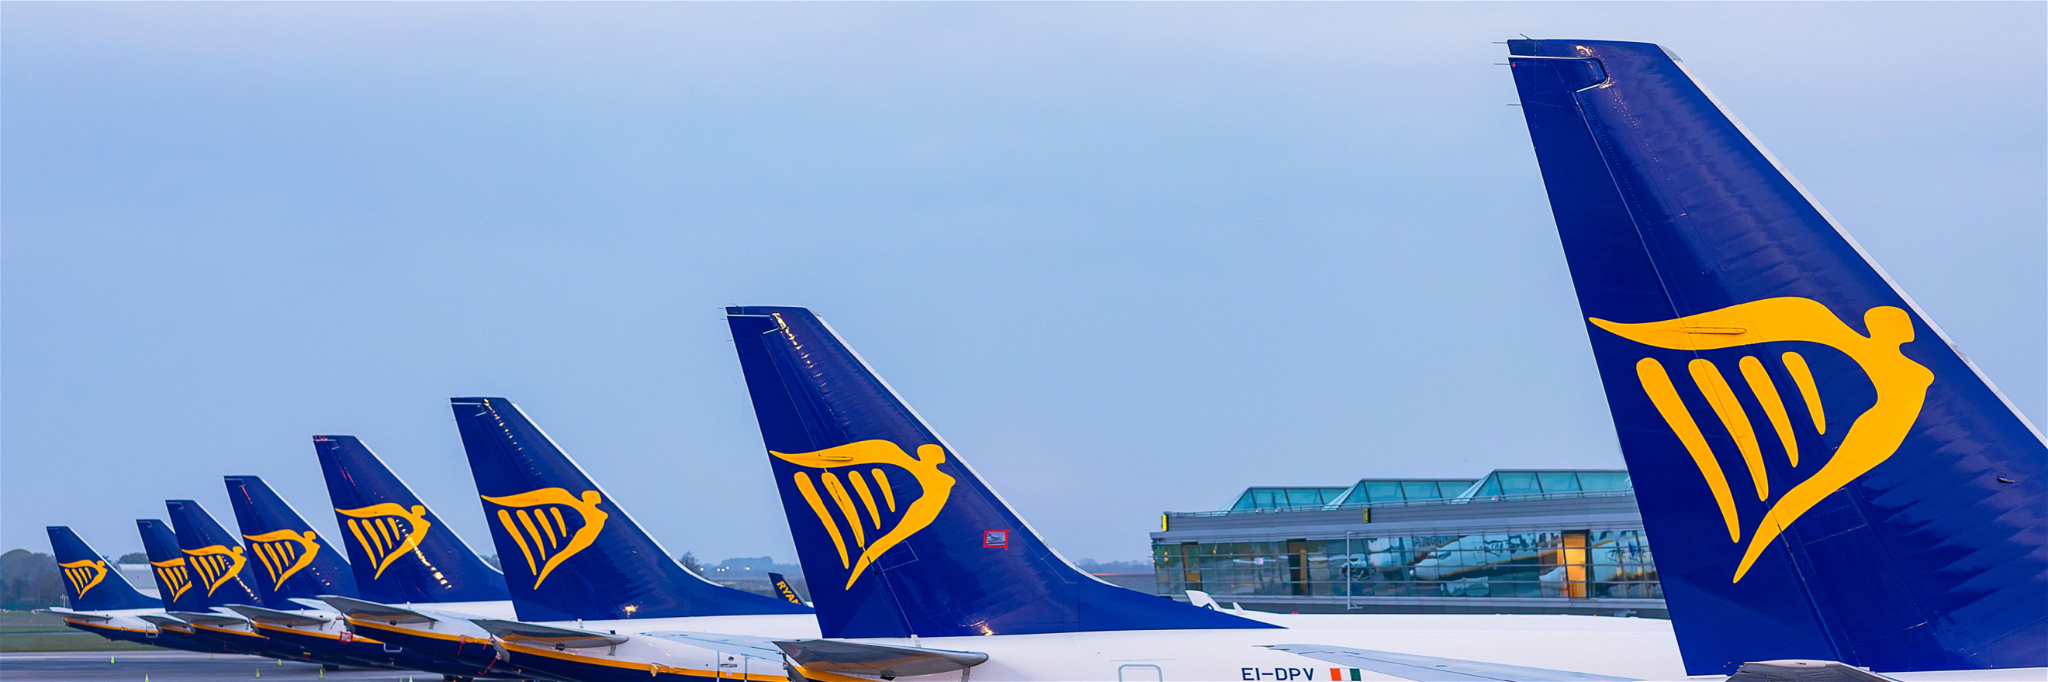 Ryanair will add&nbsp;extra flights from and to UK this winter